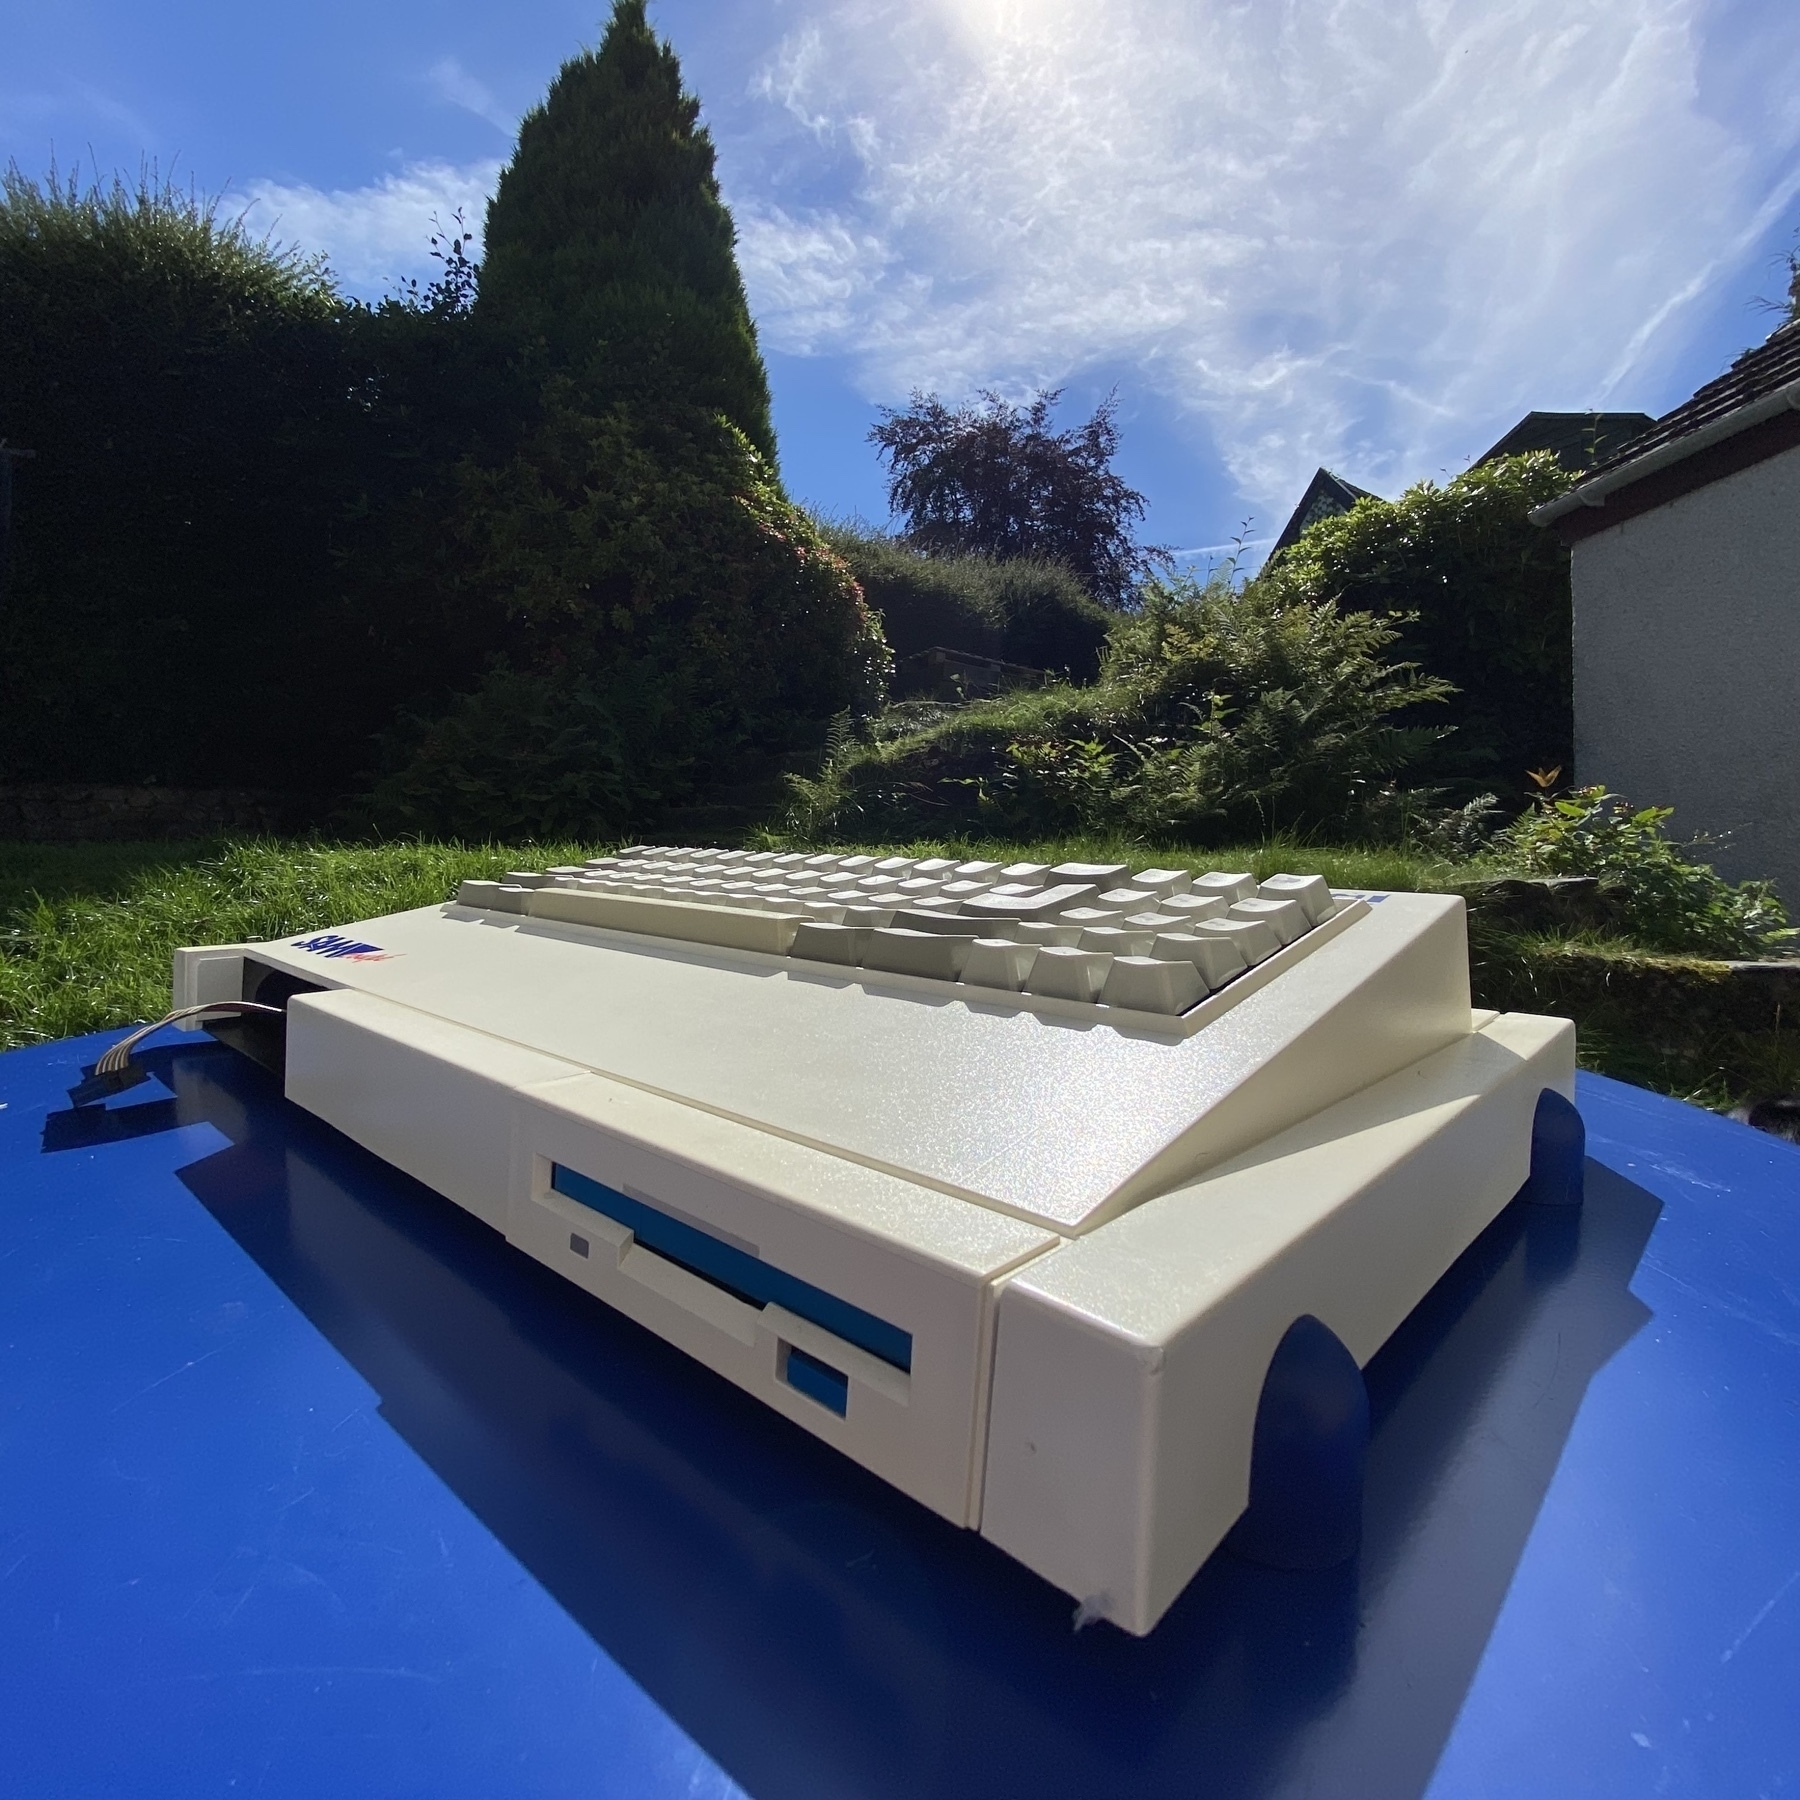 SAM Coupé computer on a garden table in bright direct sunshine